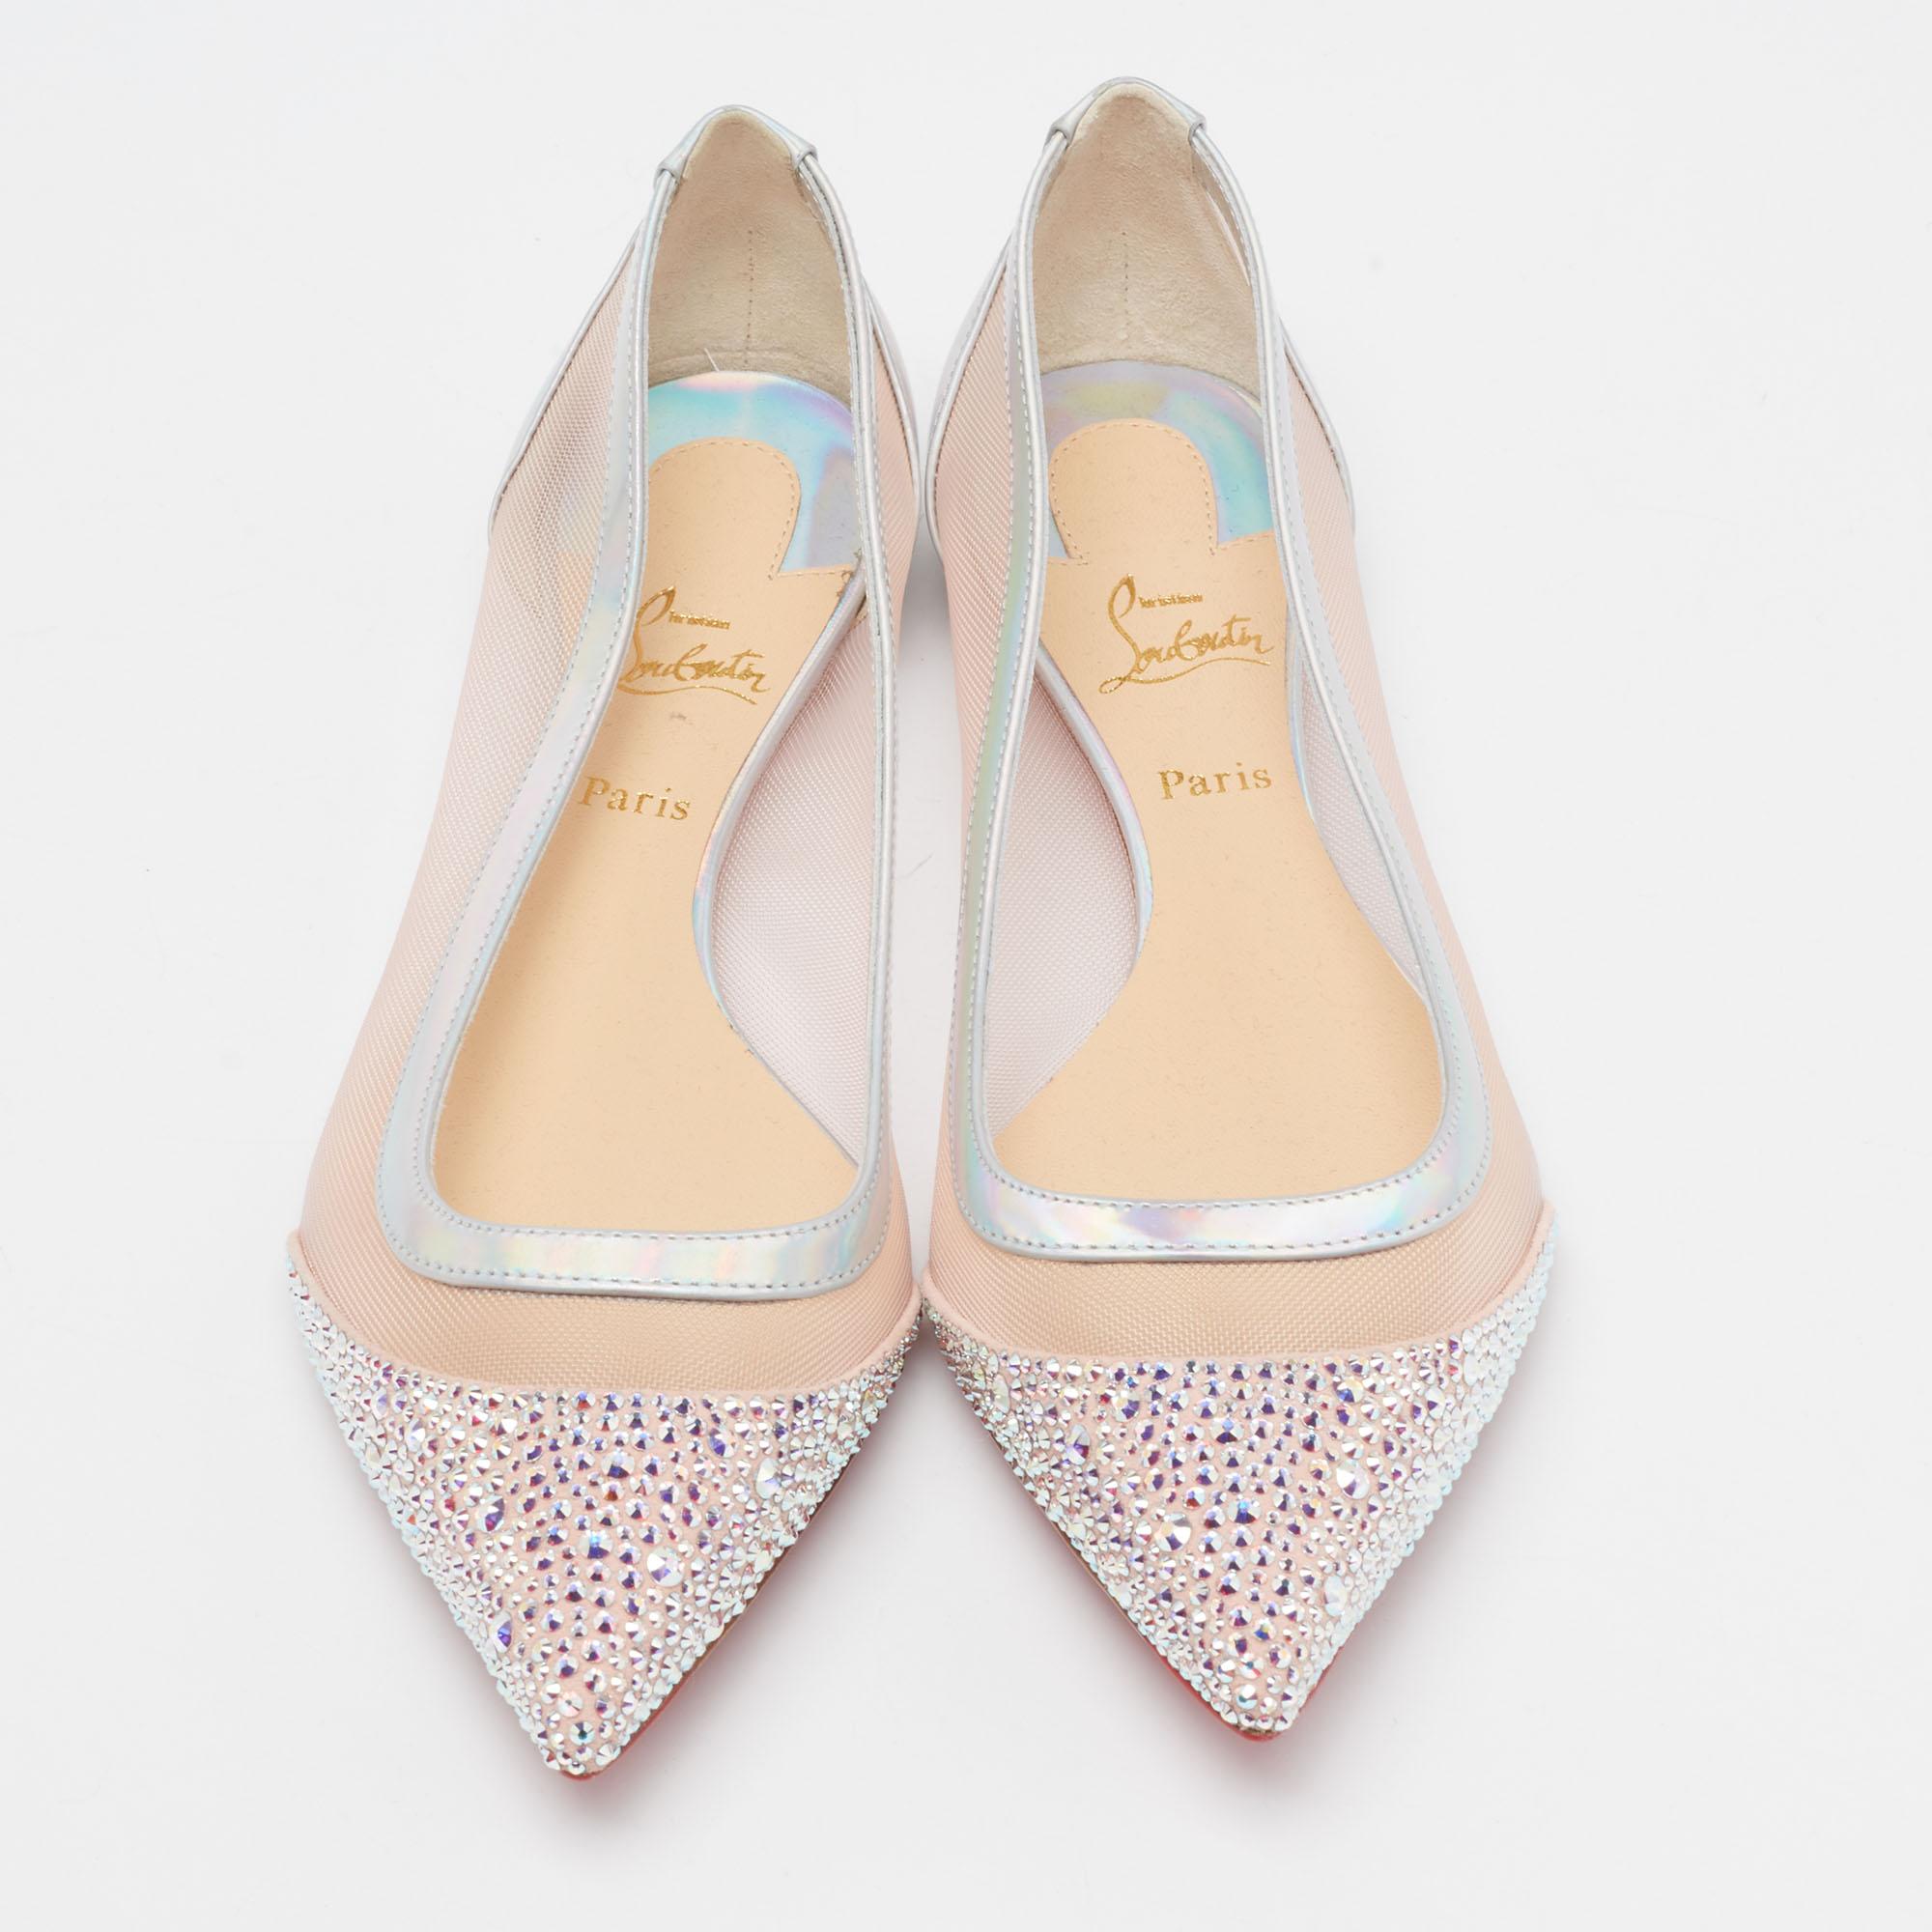 Pamper your feet with these beautifully designed Christian Louboutin ballet flats. With an elegant appeal and functional design, they are adorned with attractive crystal embellishments on the pointed toes. The pair comes created from mesh,